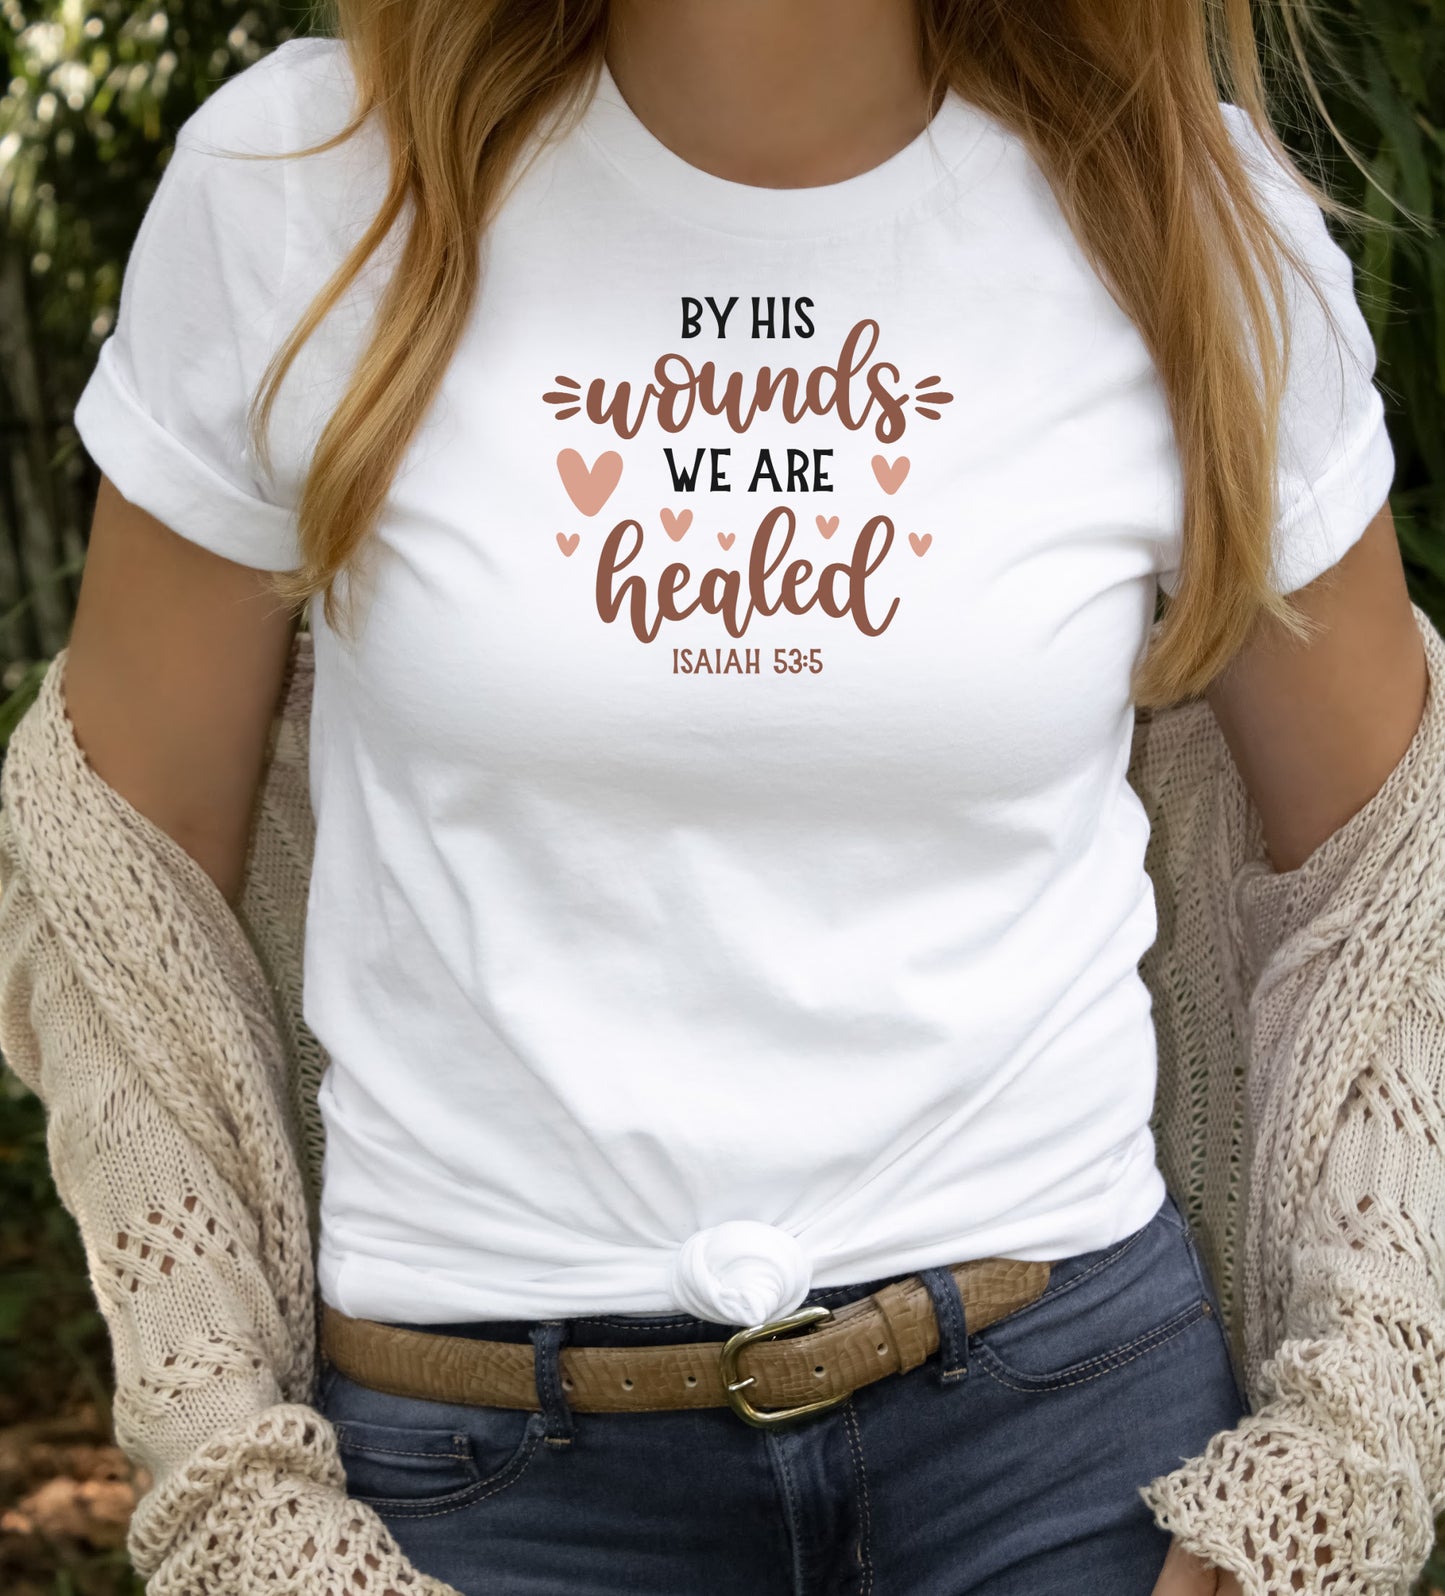 By his wounds we are healed - Isaiah 53:5 Short sleeve unisex white T-Shirt